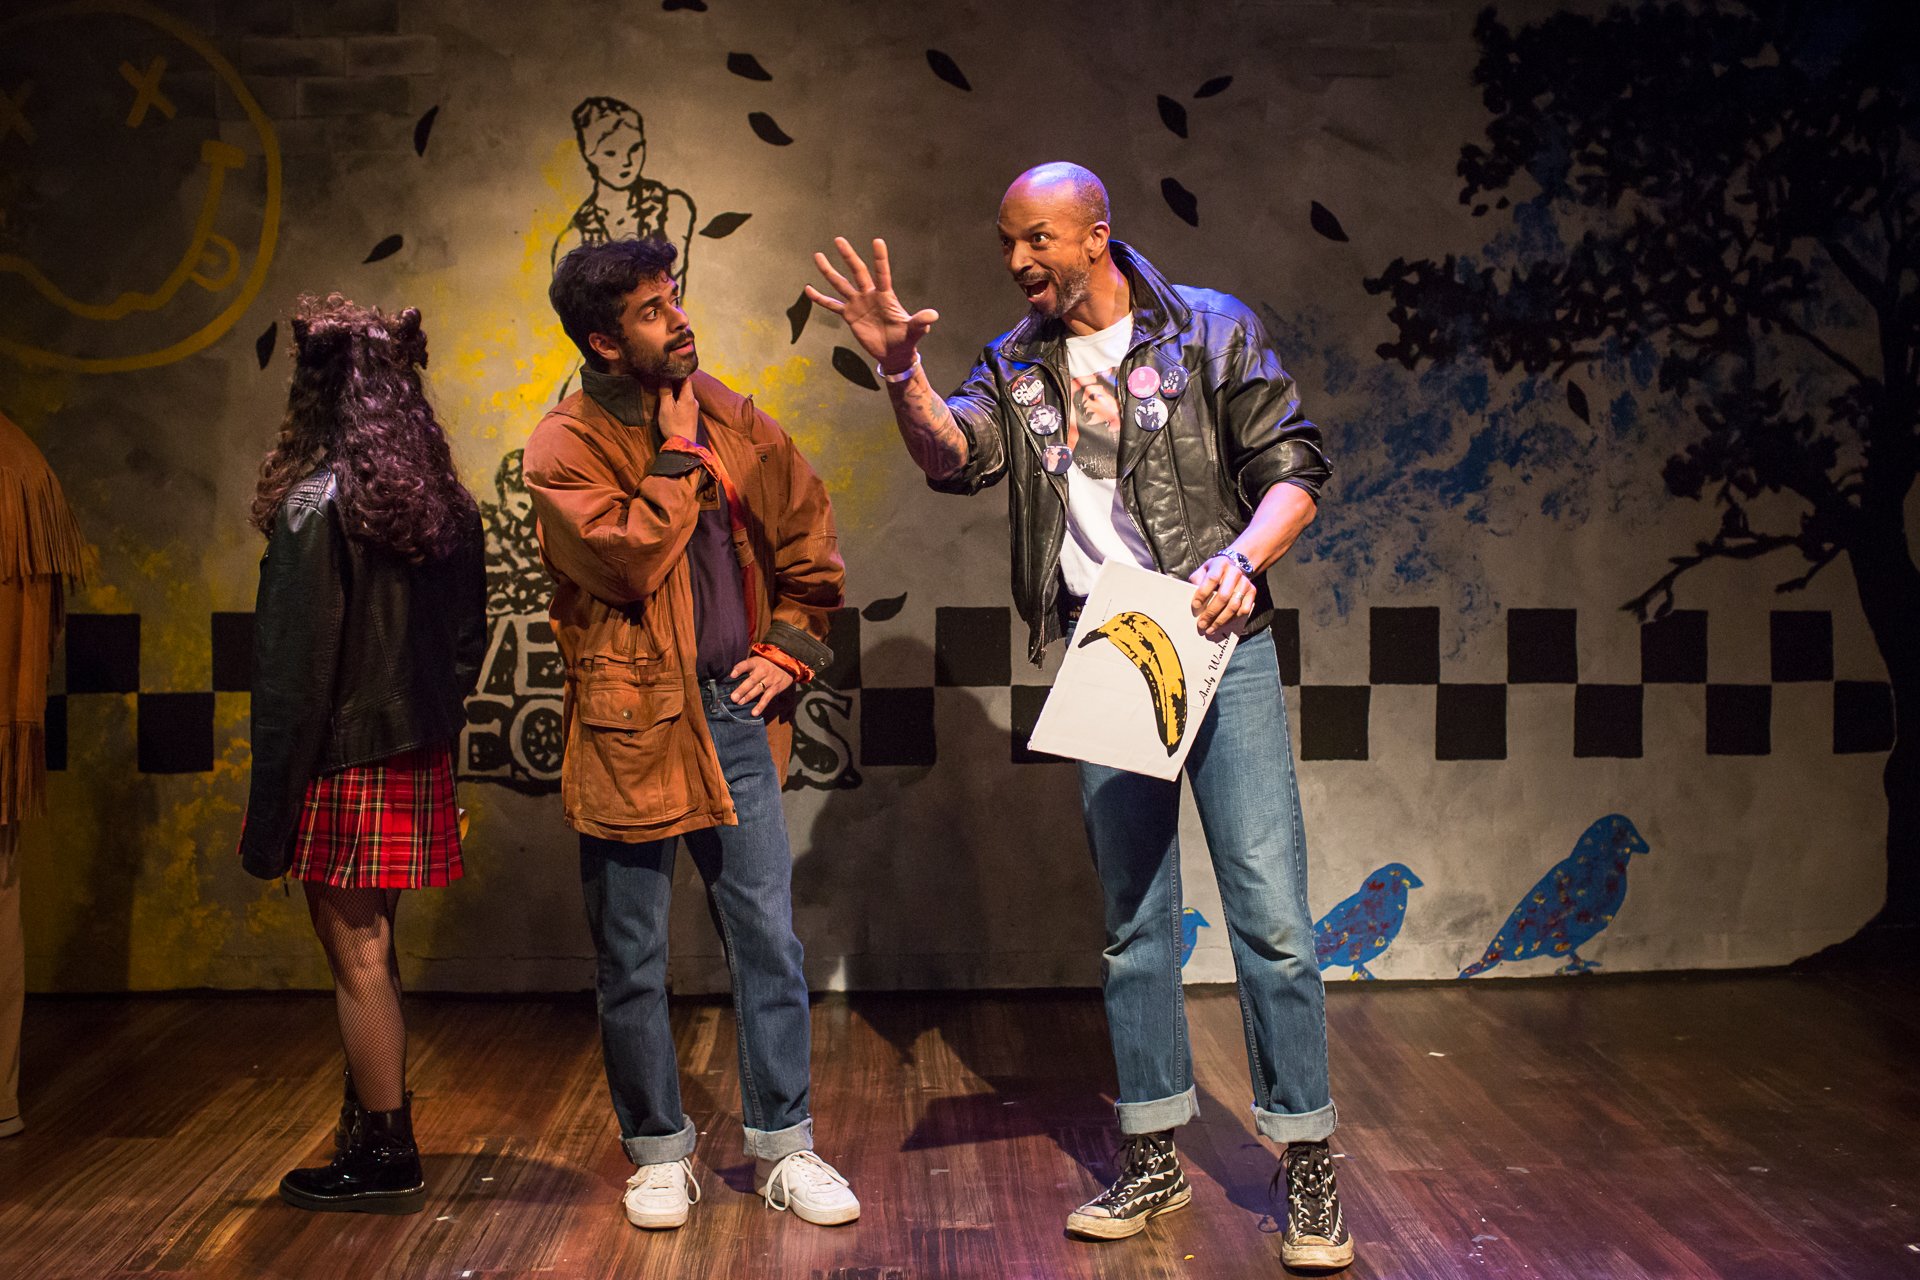  Alexander M. Cole and Rhasaan Oyasaba Manning in  East Side Stories, Actually  at The Metropolitan Playhouse. Photo by Vadim Goldenberg. 